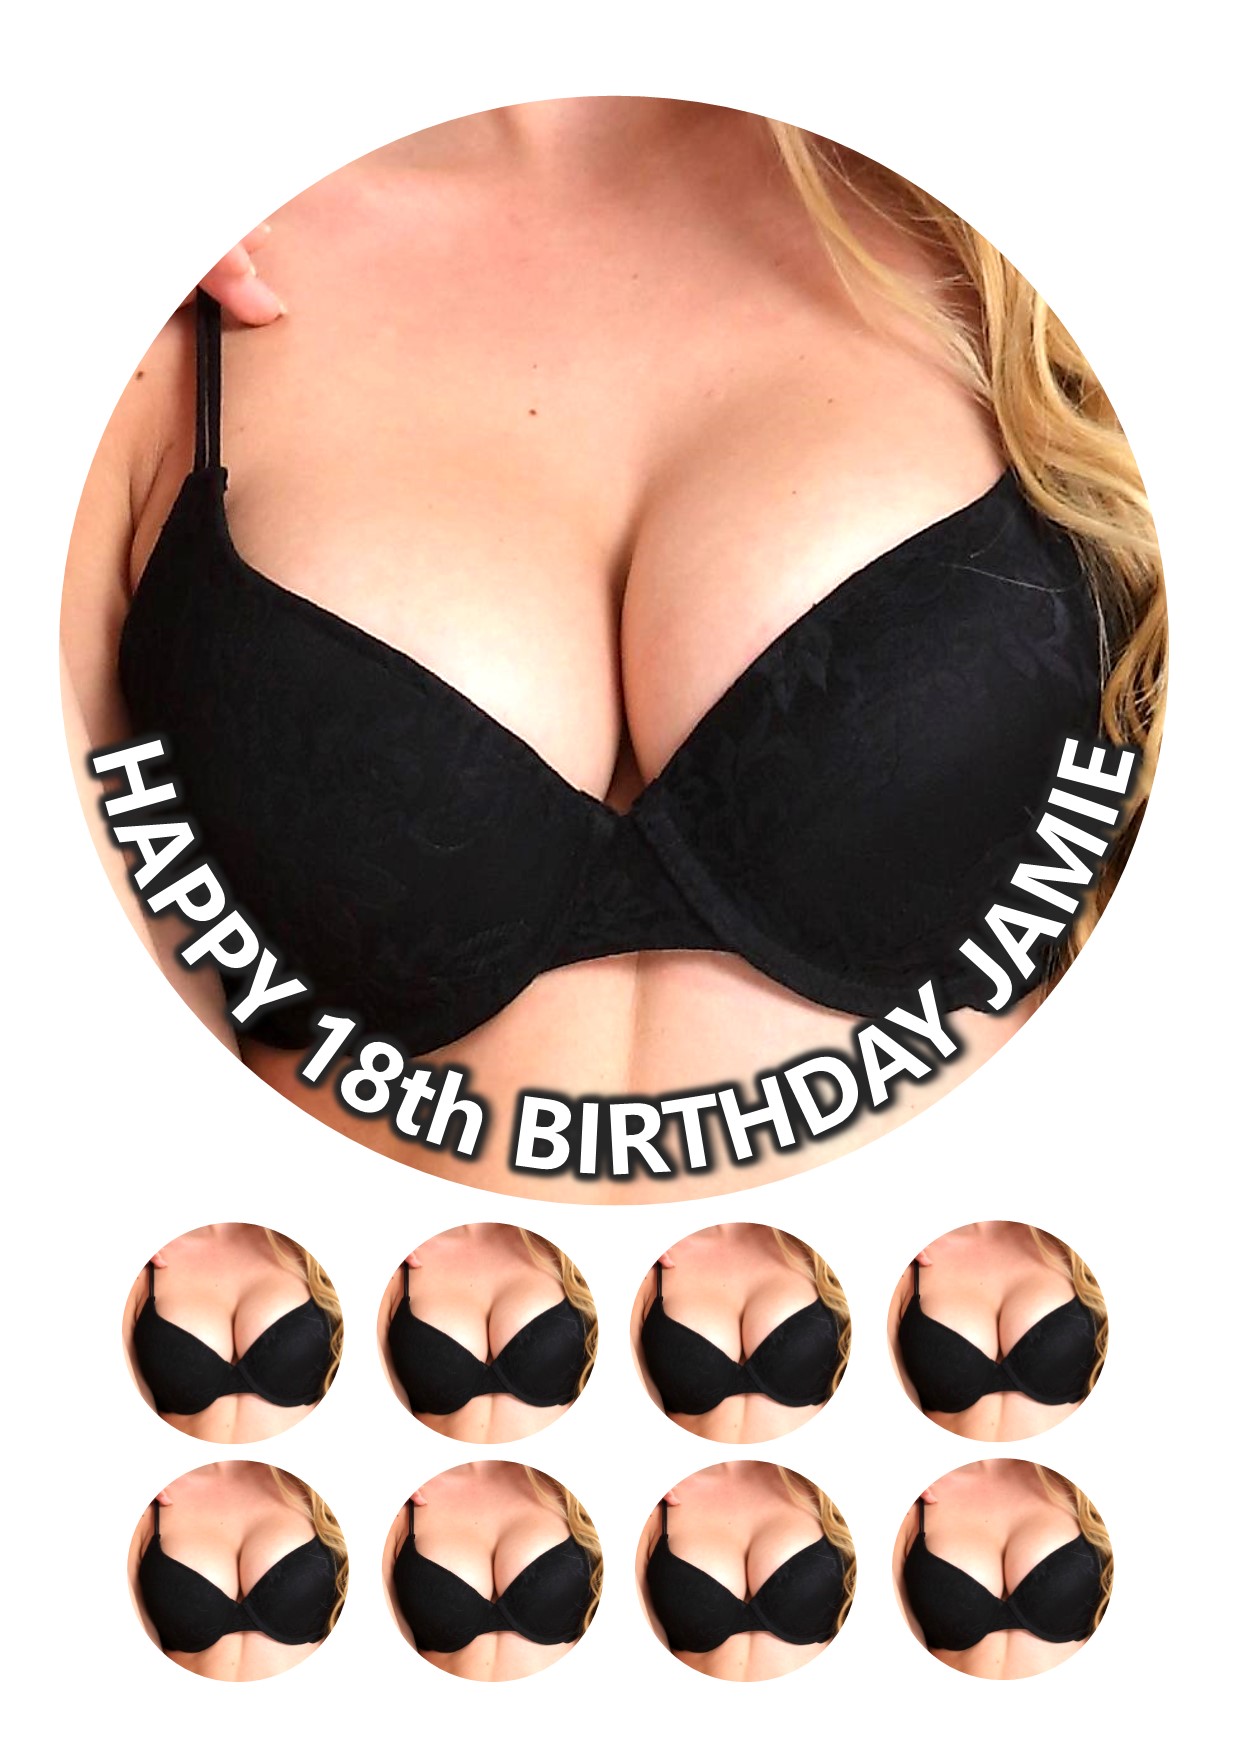 Boobs Cleavage Bra Cake Topper & 8 Cupcake Toppers (Version 3)